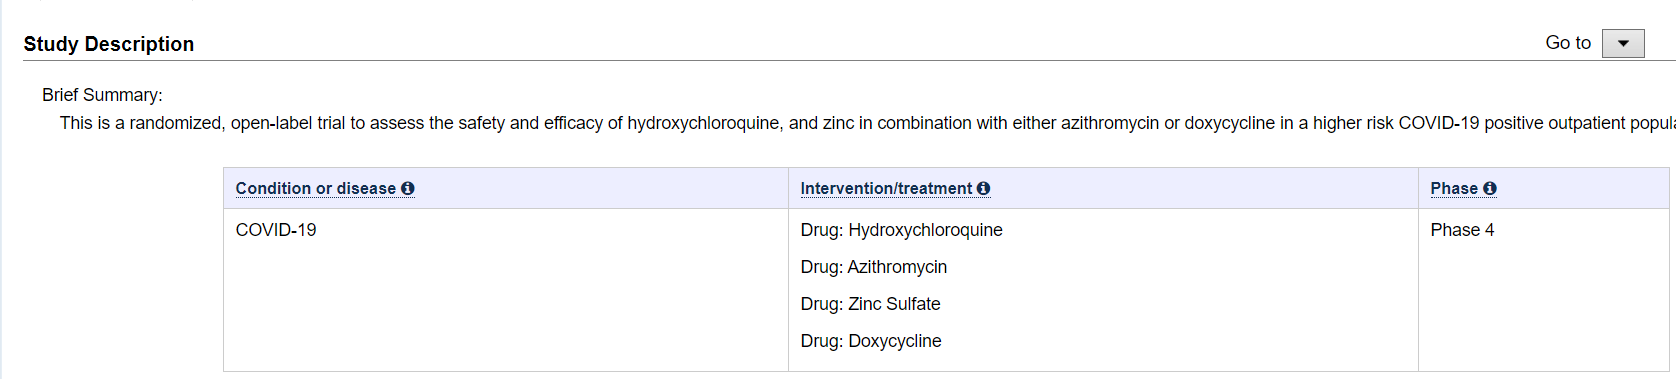 Hydroxychloroquine and Zinc With Either Azithromycin or Doxycycline for Treatment of COVID-19.PNG